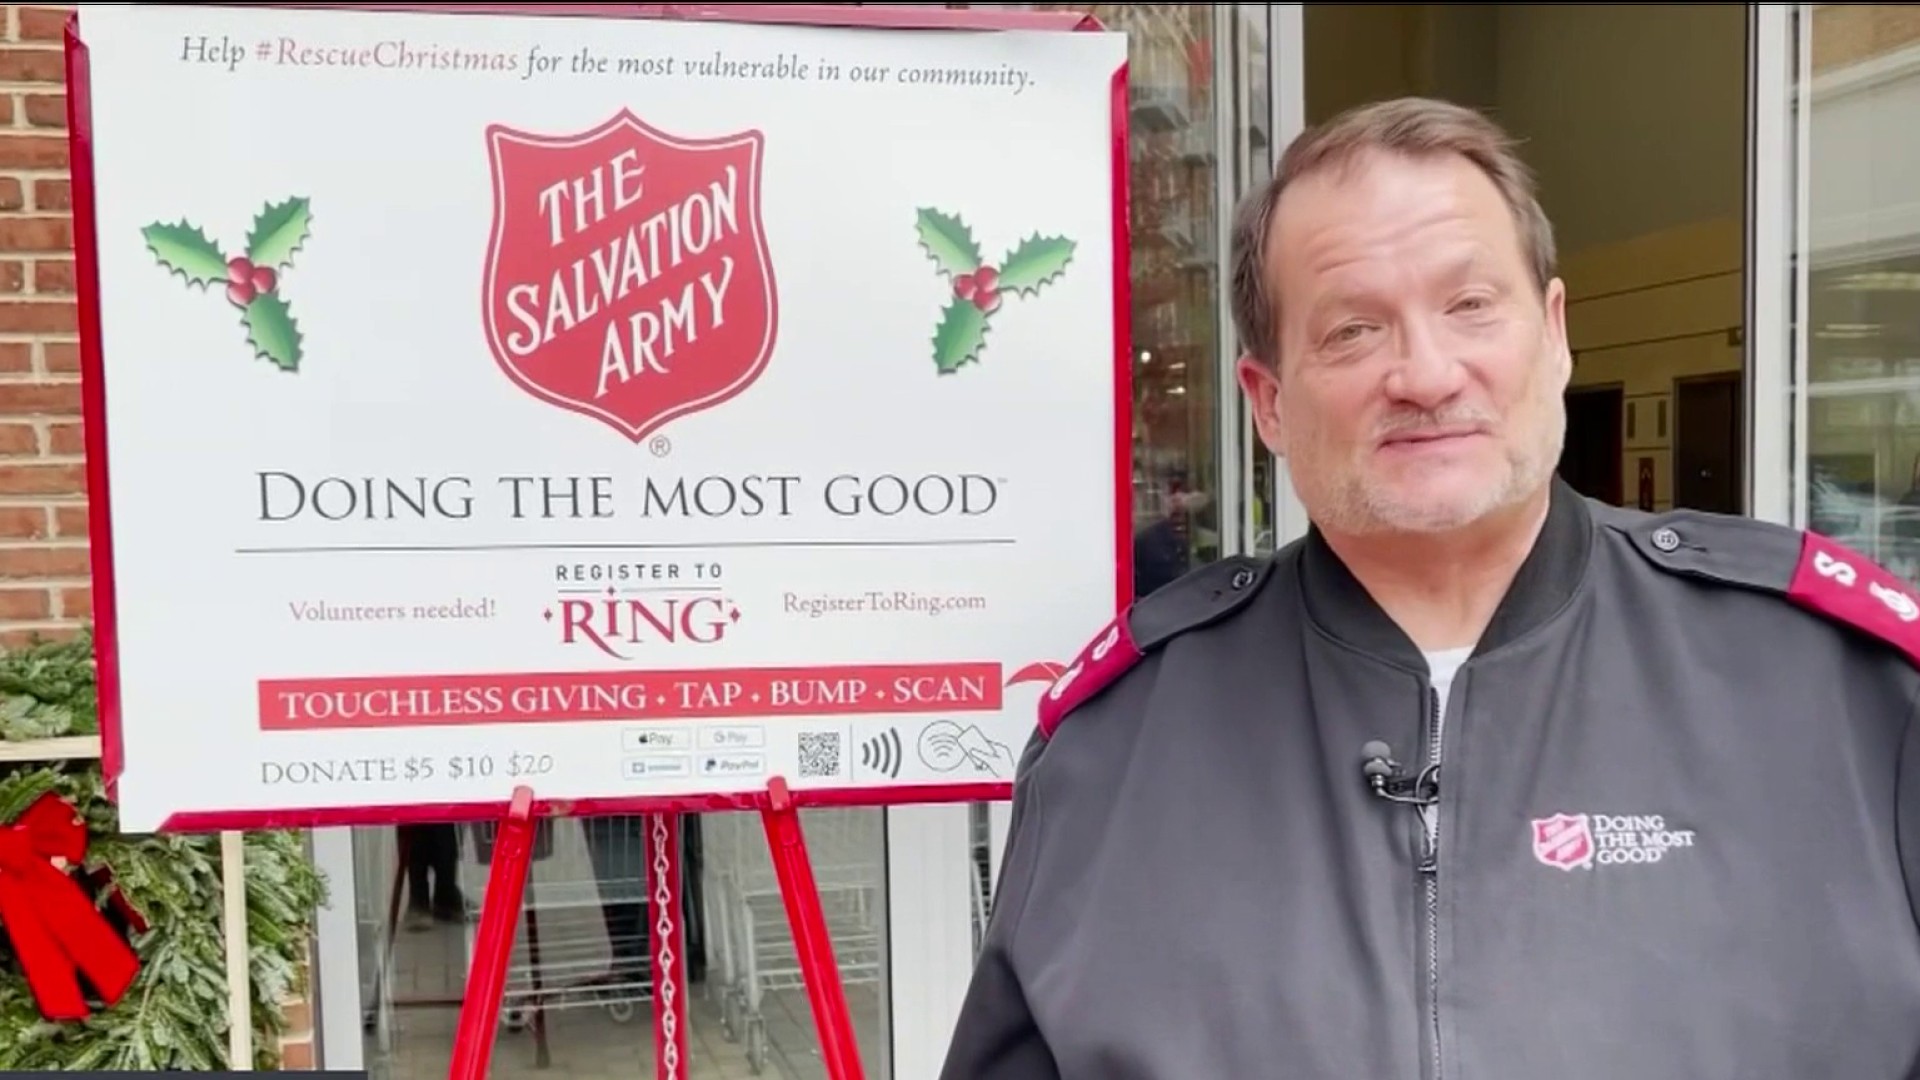 Register To Ring for The Salvation Army - YouTube